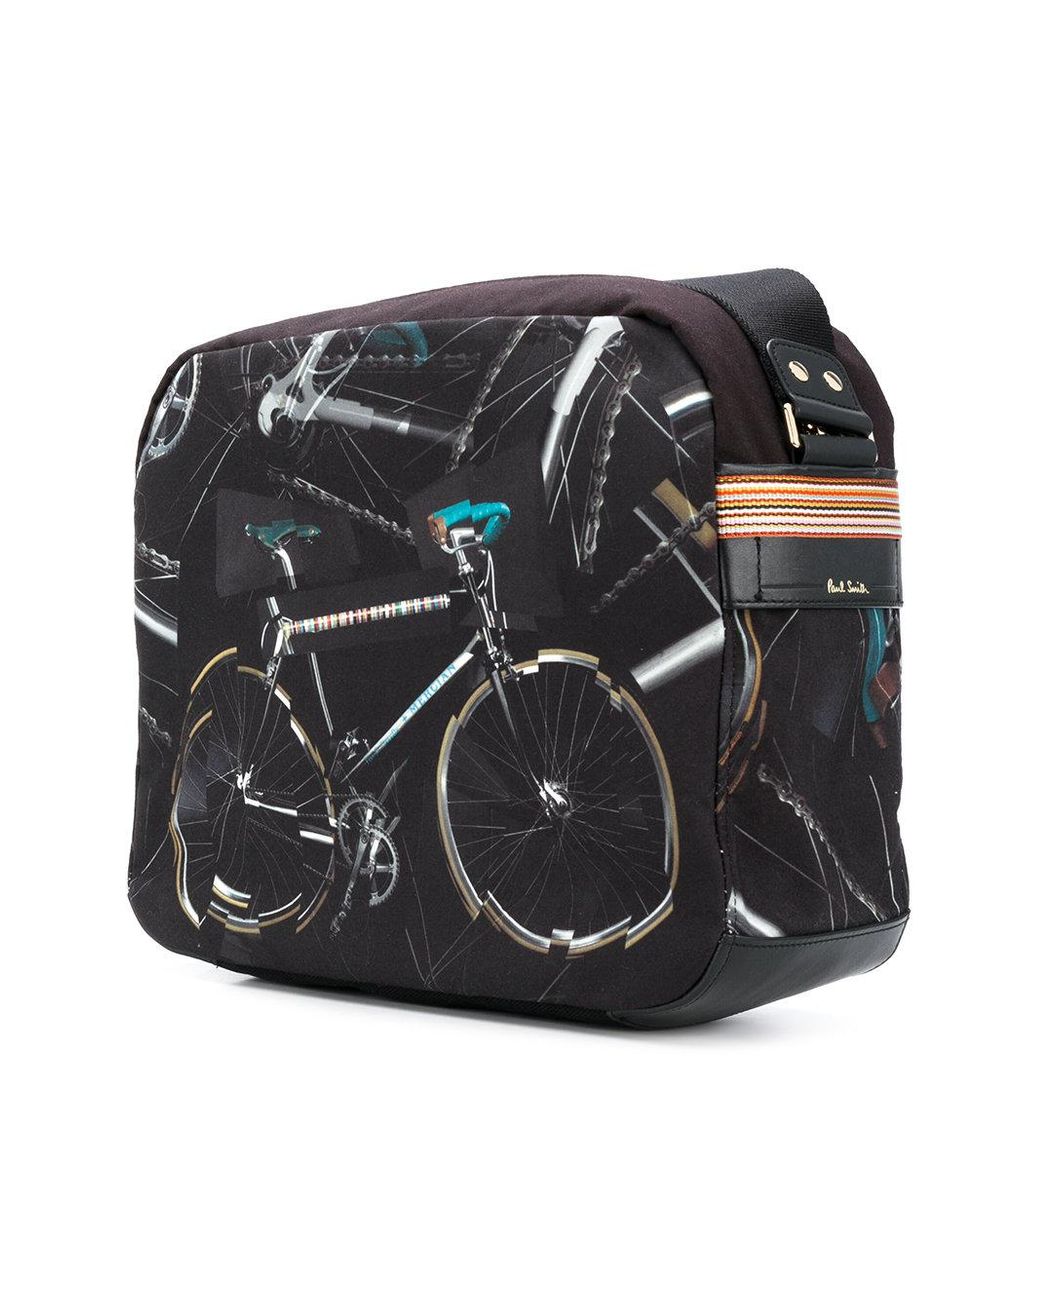 Paul Smith Bicycle Print Messenger Bag in Black for Men | Lyst Canada